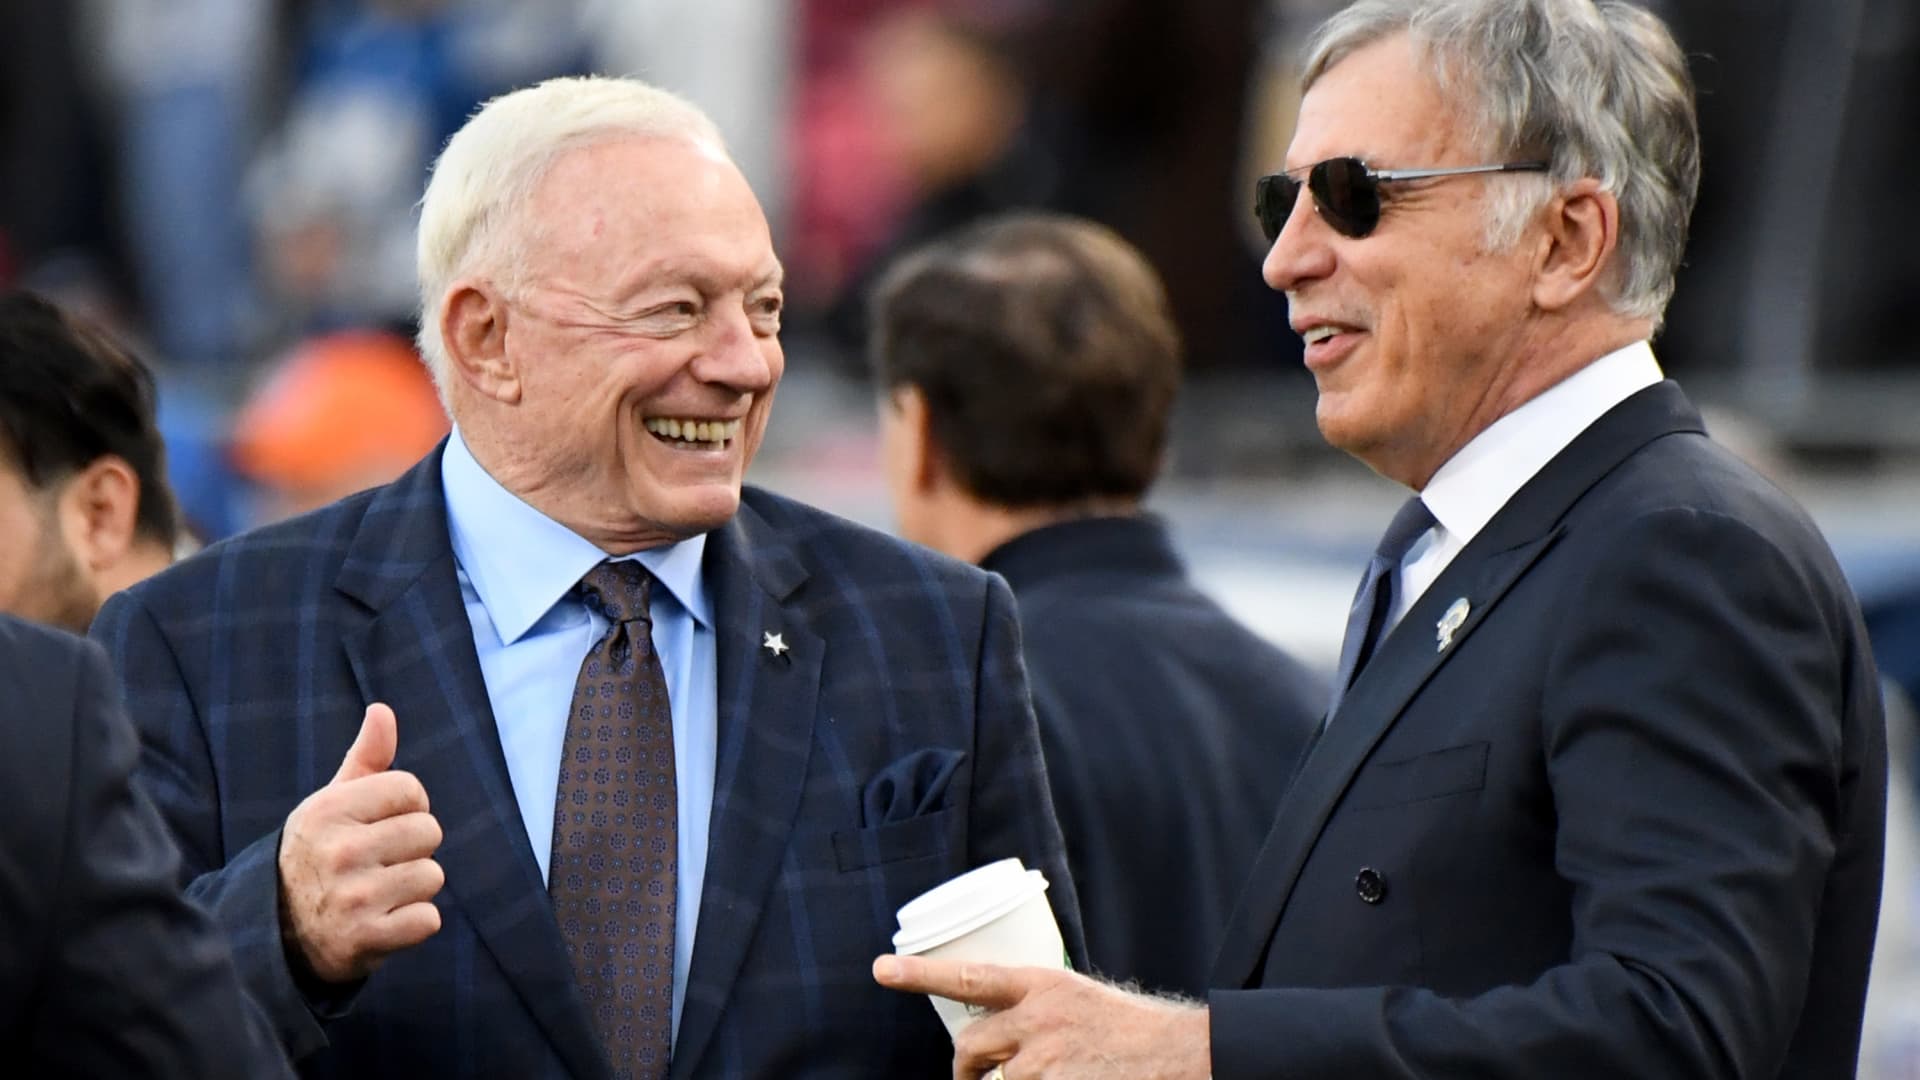 Dallas Cowboys owner Jerry Jones, left, with Los Angeles Rams owner Stan Kronke prior to a NFL playoff football game at the Los Angeles Memorial Coliseum on Saturday, January 12, 2018 in Los Angeles, California.